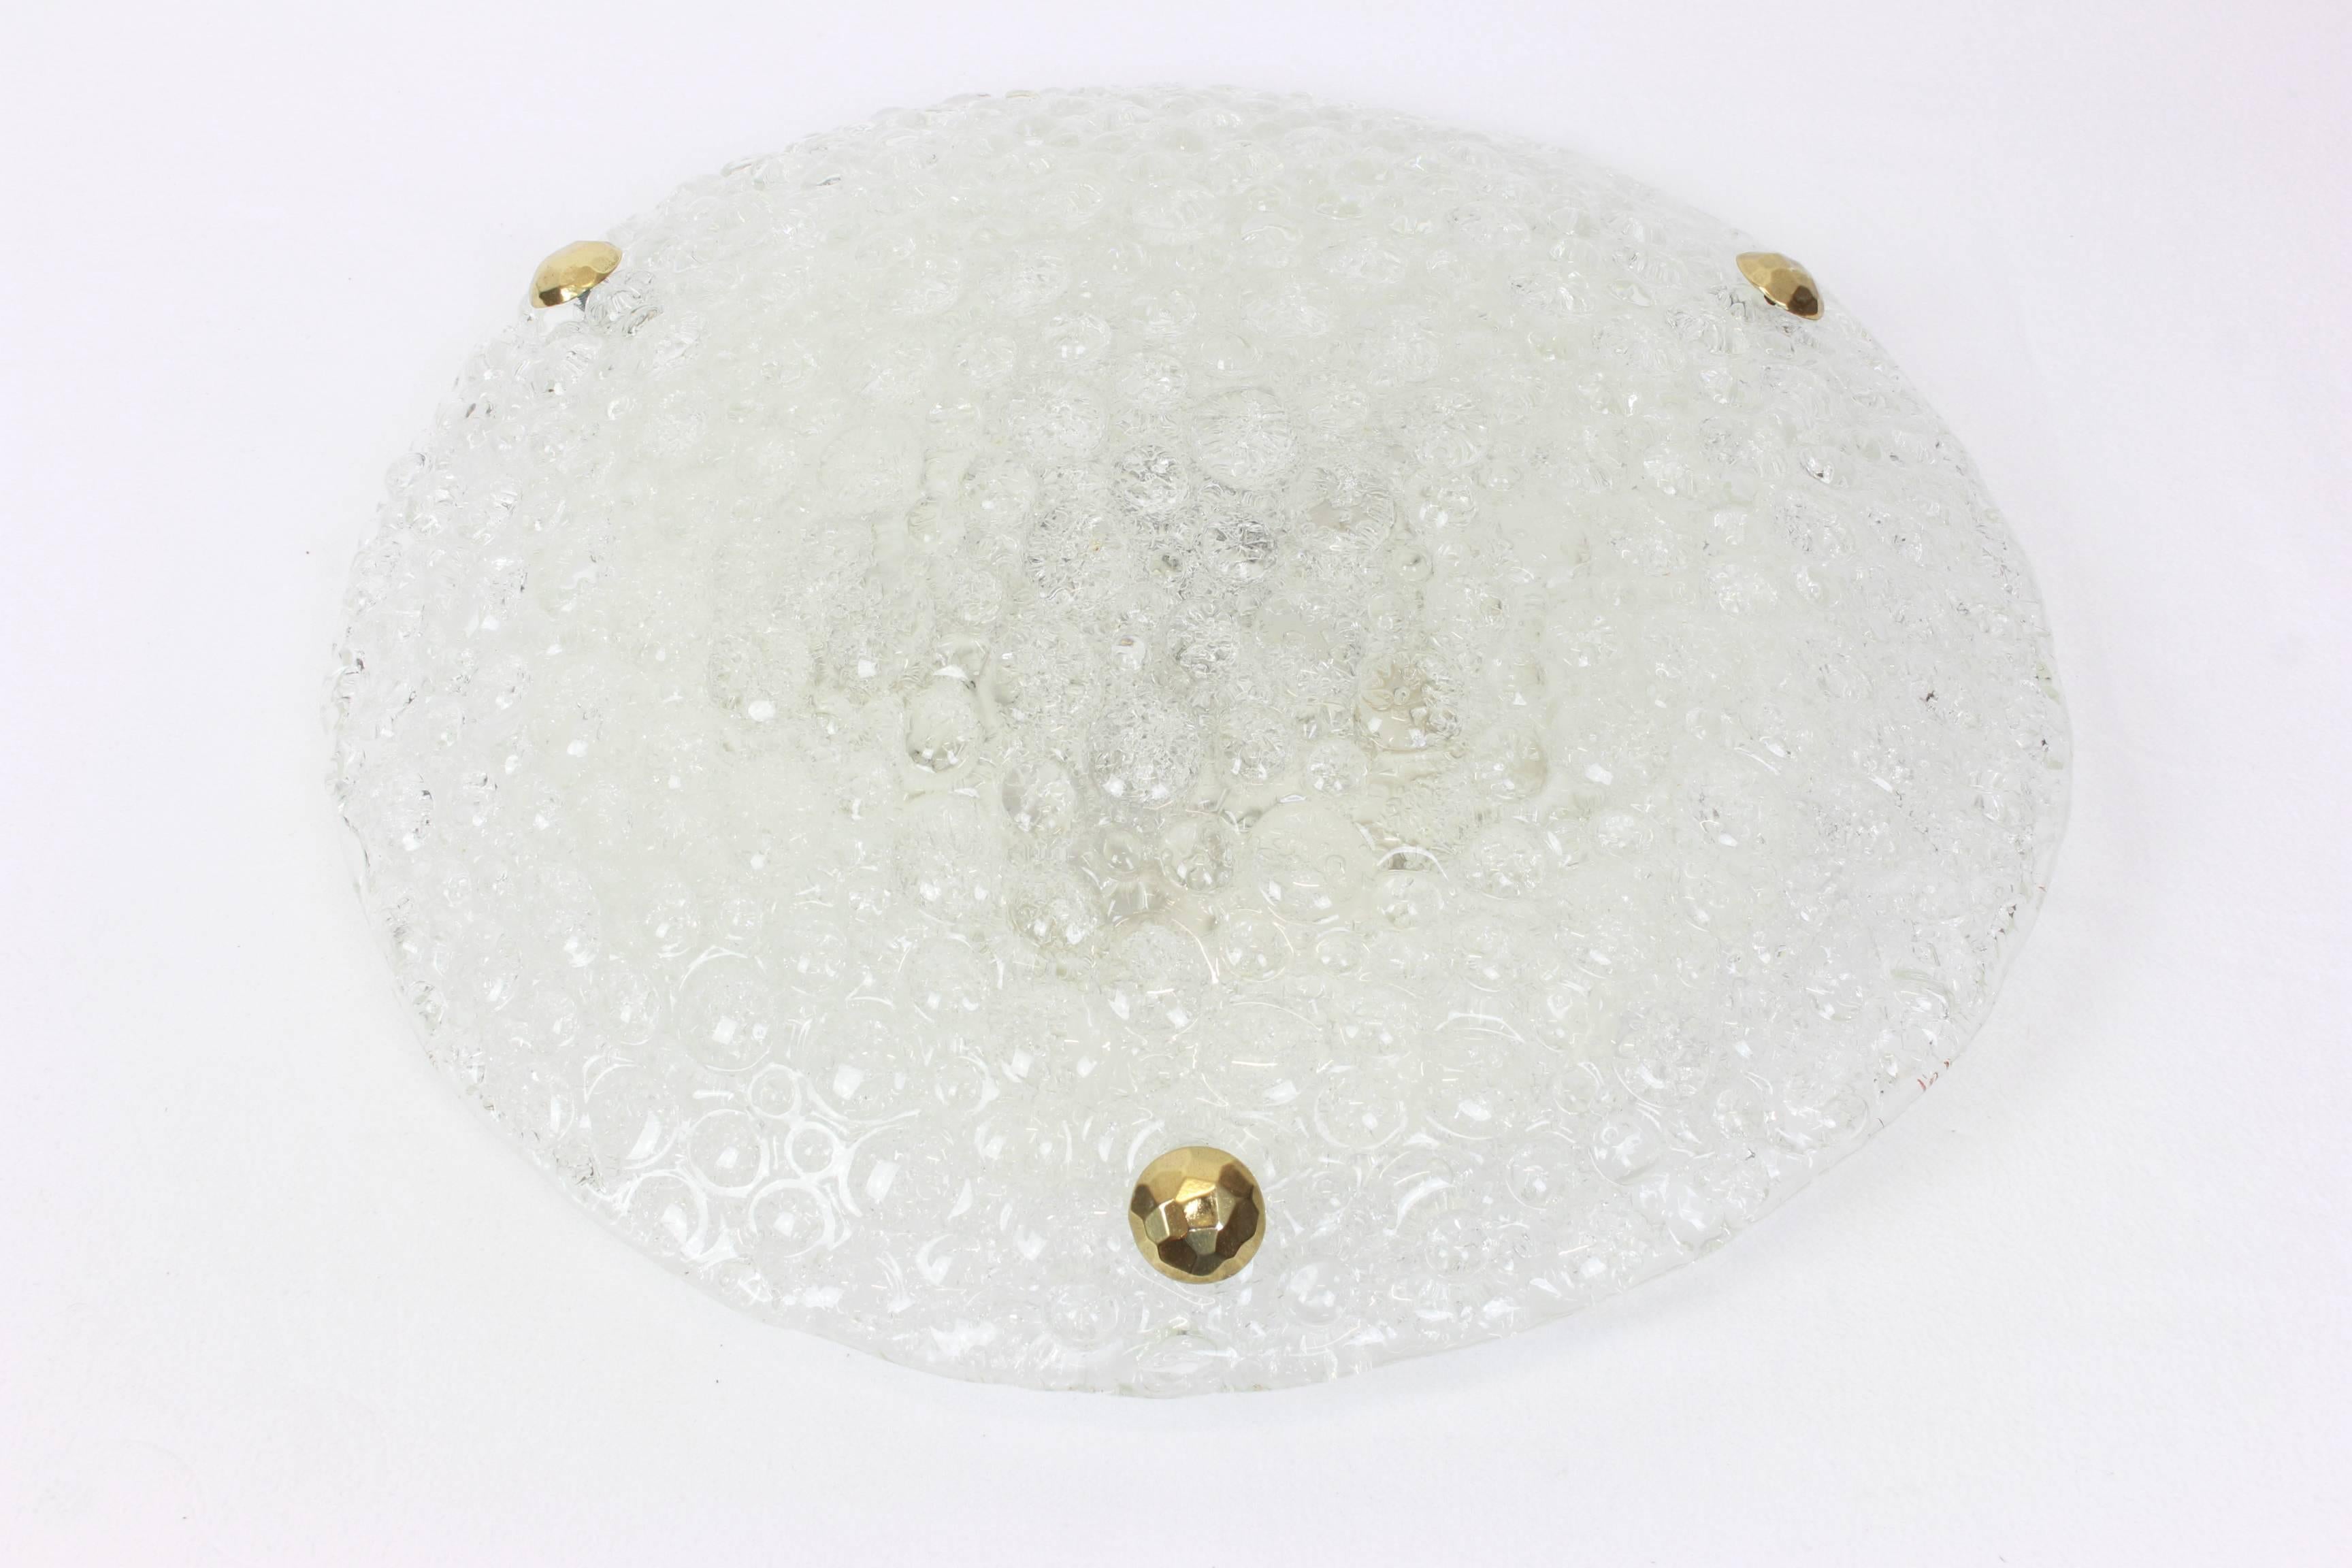 A wonderful round ice glass flushmount by Hillebrand Leuchten, Germany, 1970s.
Thick textured Murano ice glass fixture on a white metal base with three brass screws.

High quality and in very good condition. Cleaned, well-wired and ready to